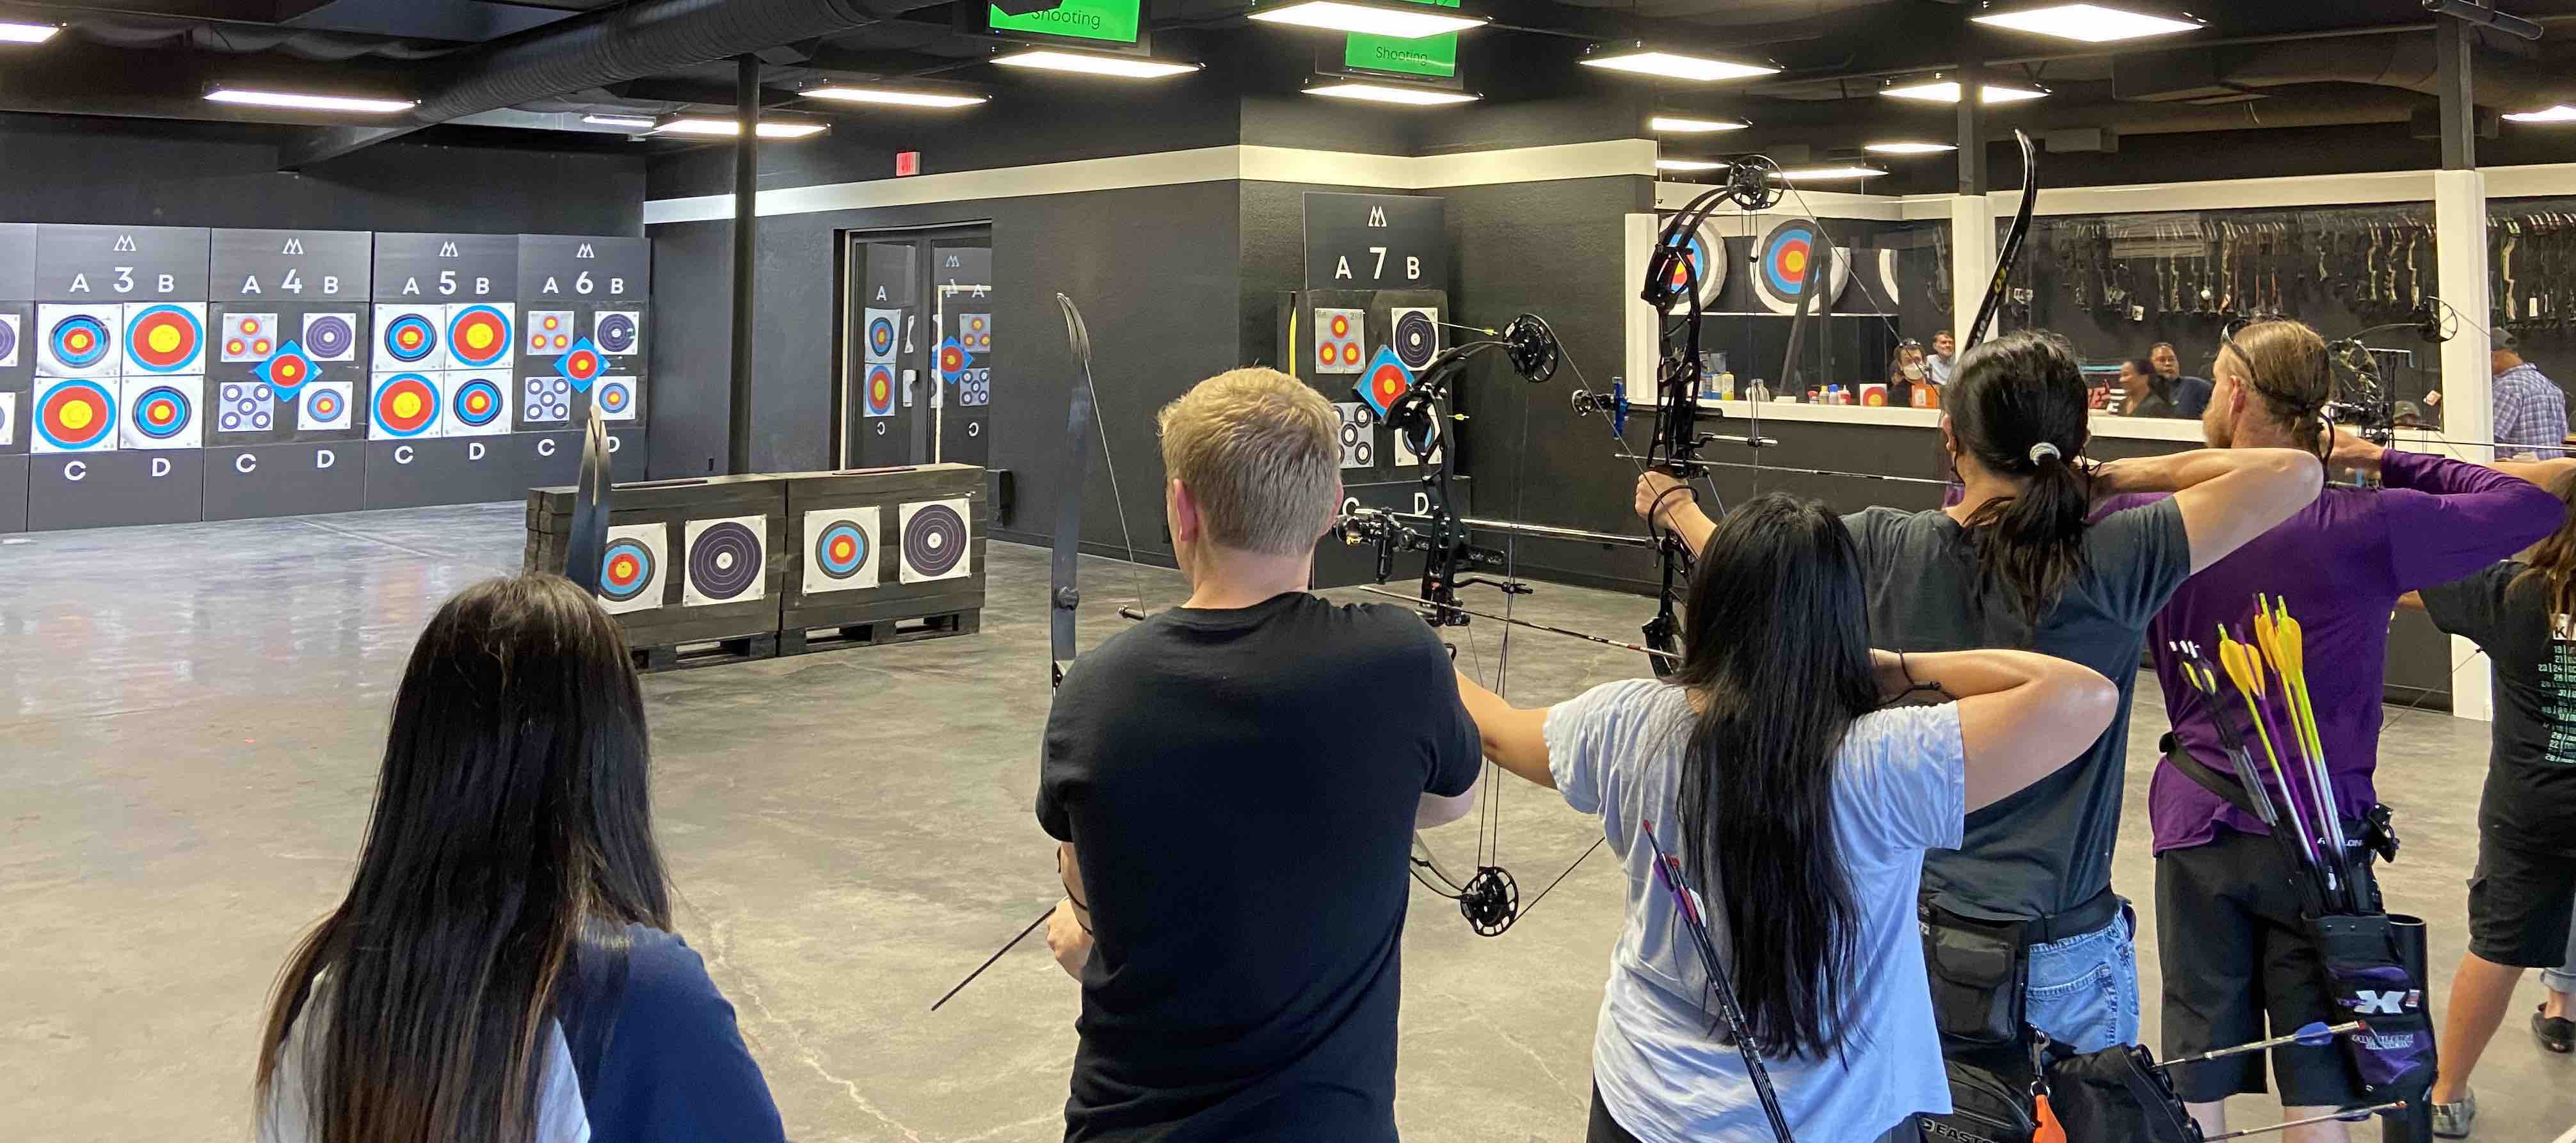 indoor range showing targets and archers